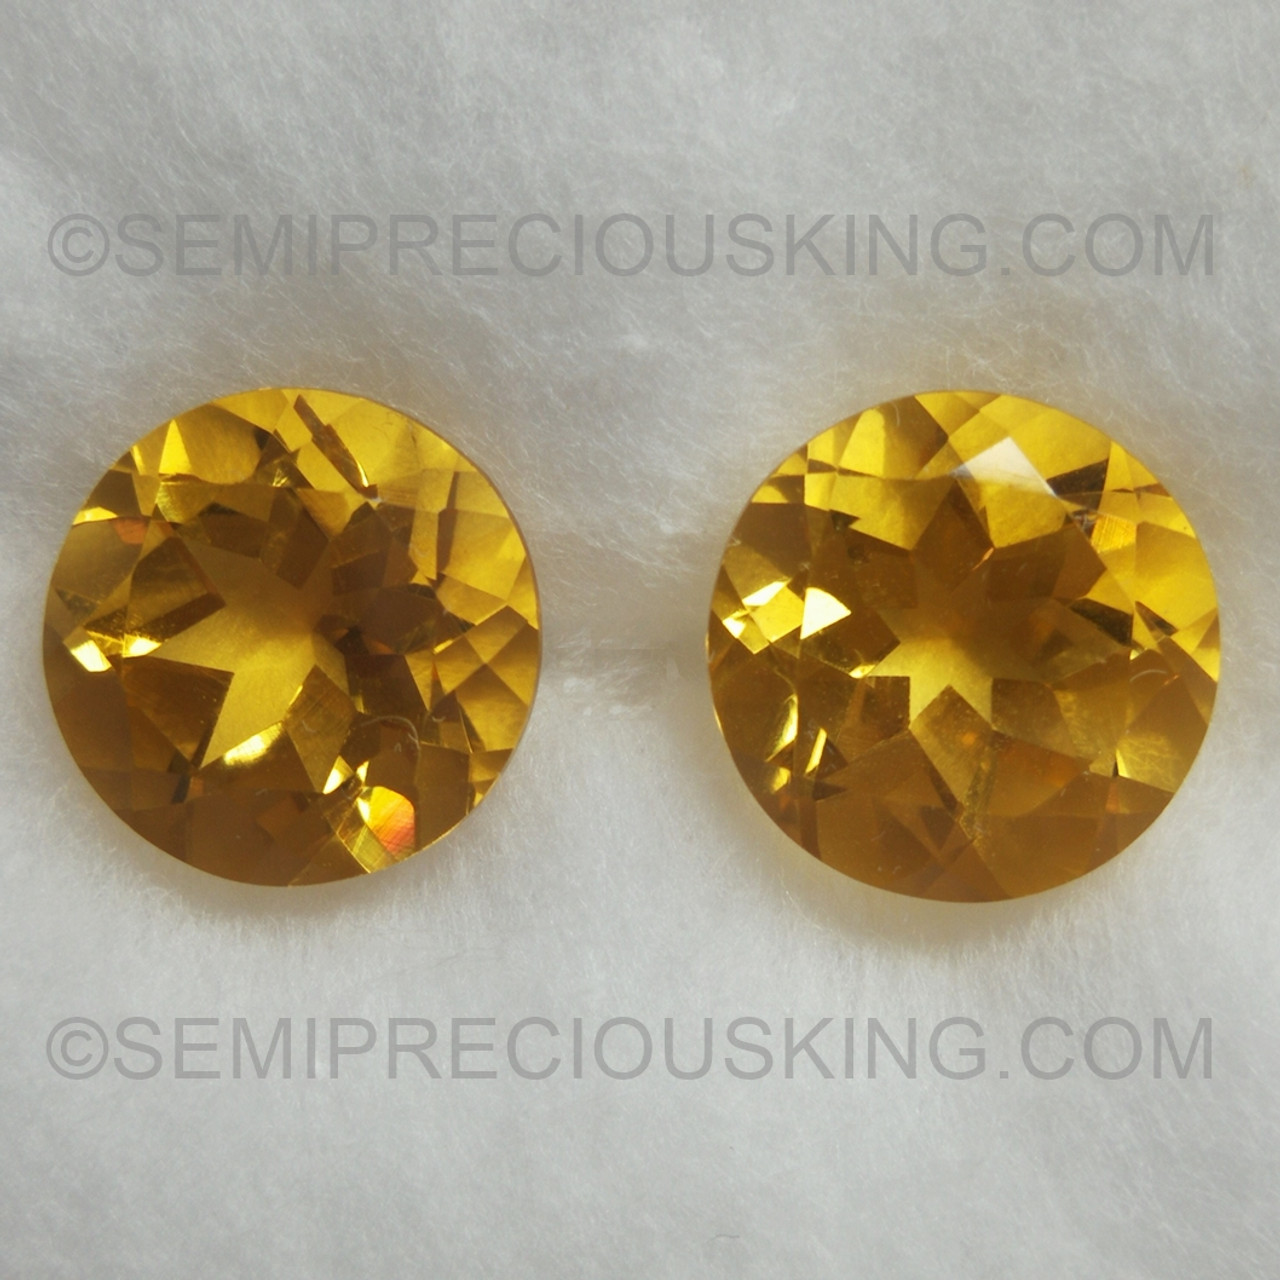 Details about   Natural CITRINE 5X5 mm Cushion Faceted Cut Loose Gemstone AB01 